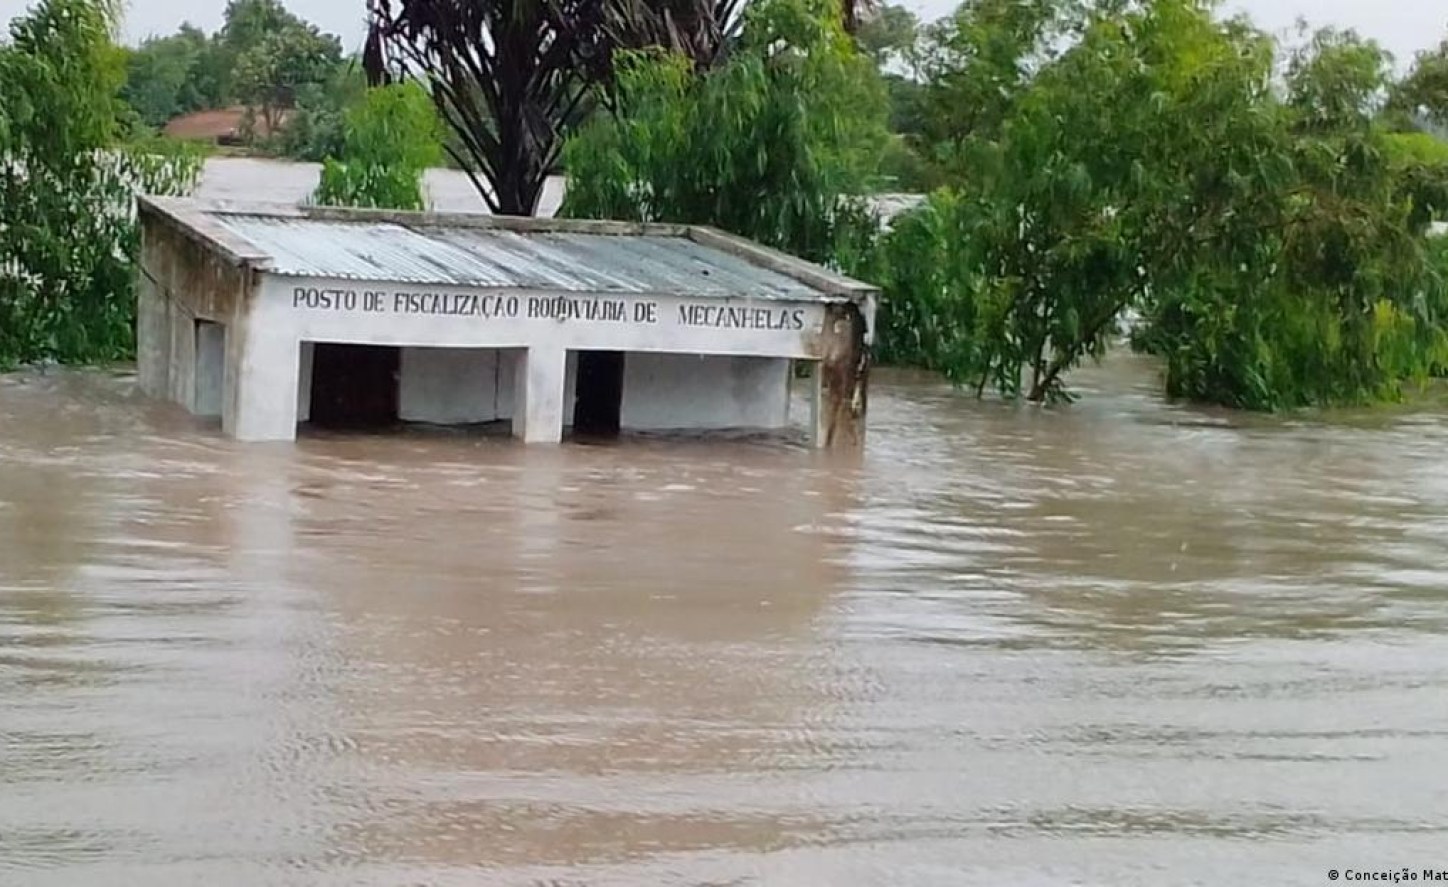 Mozambique: About 50,000 affected by torrential rain in southern region